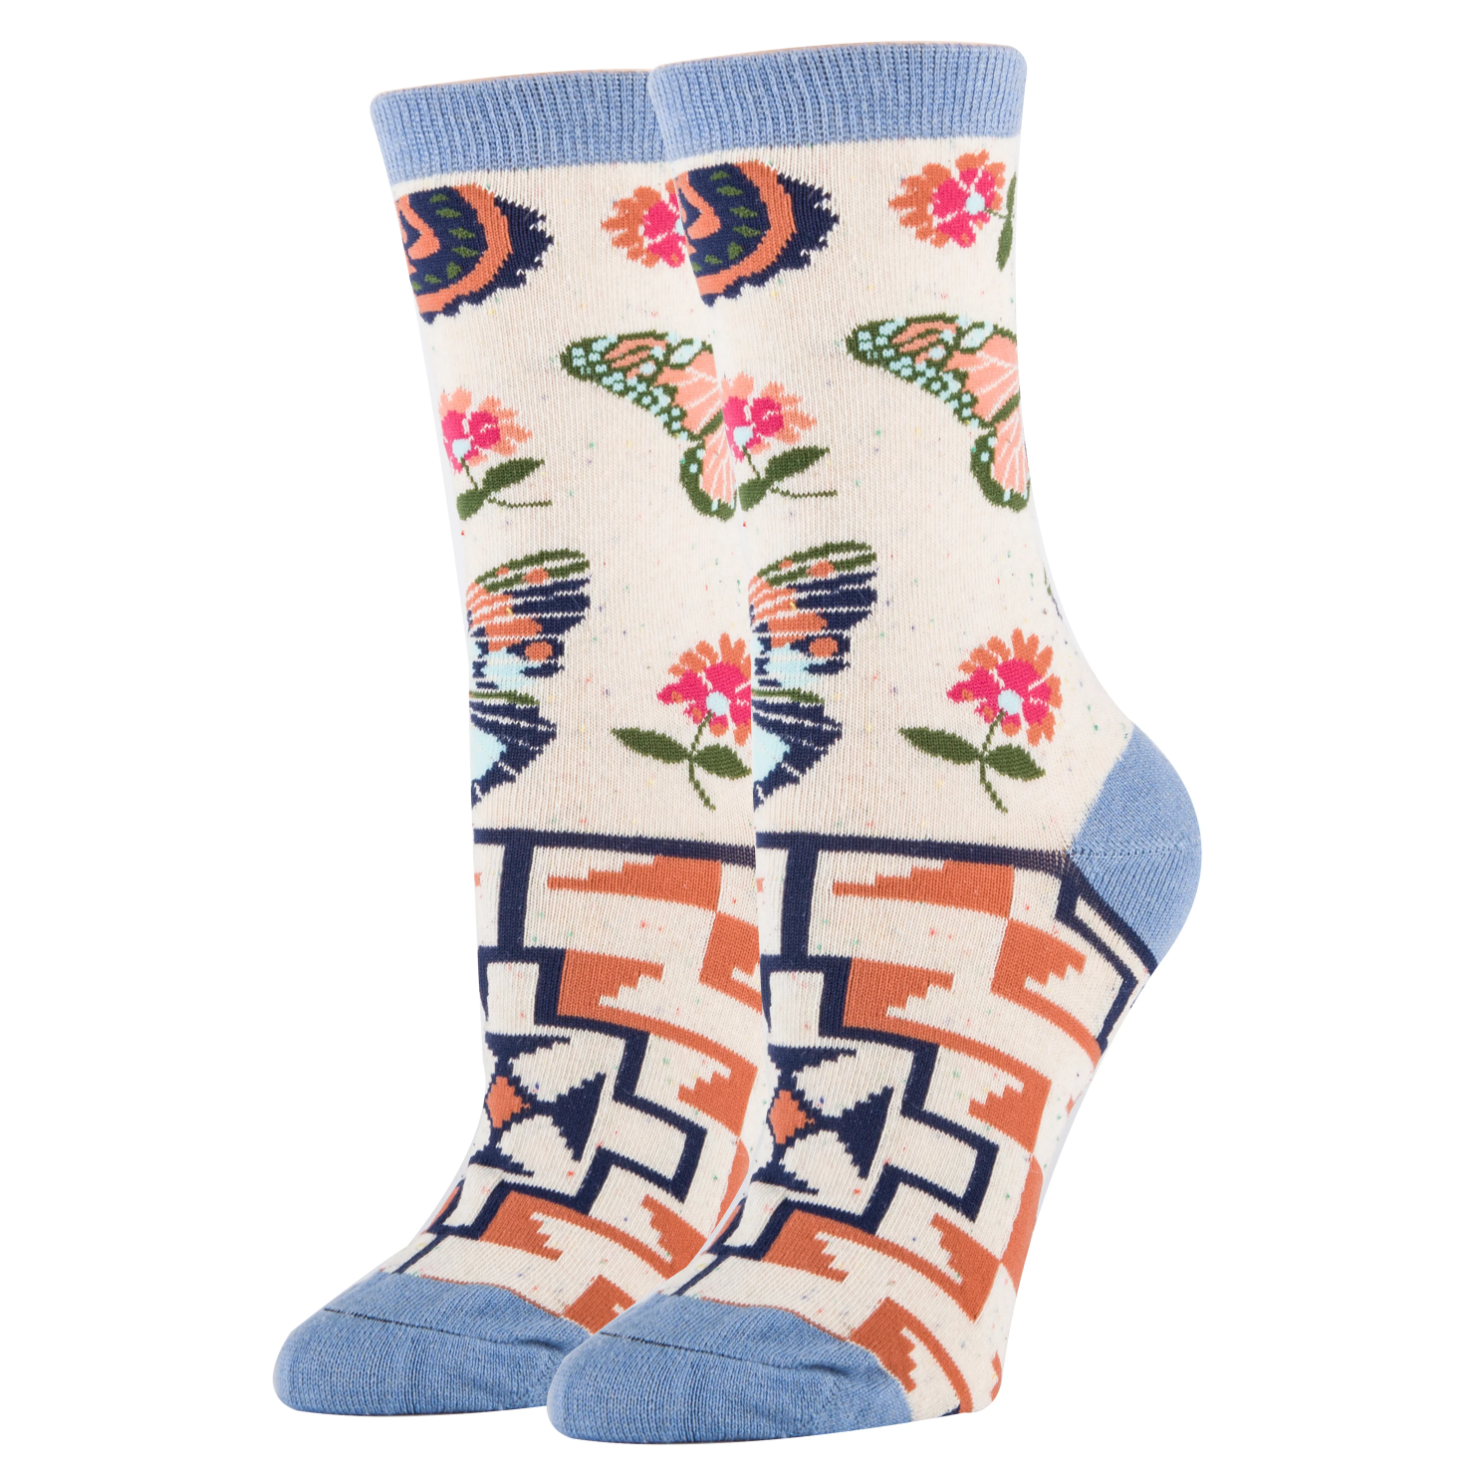 Sock - Small Crew: Butterfly Print